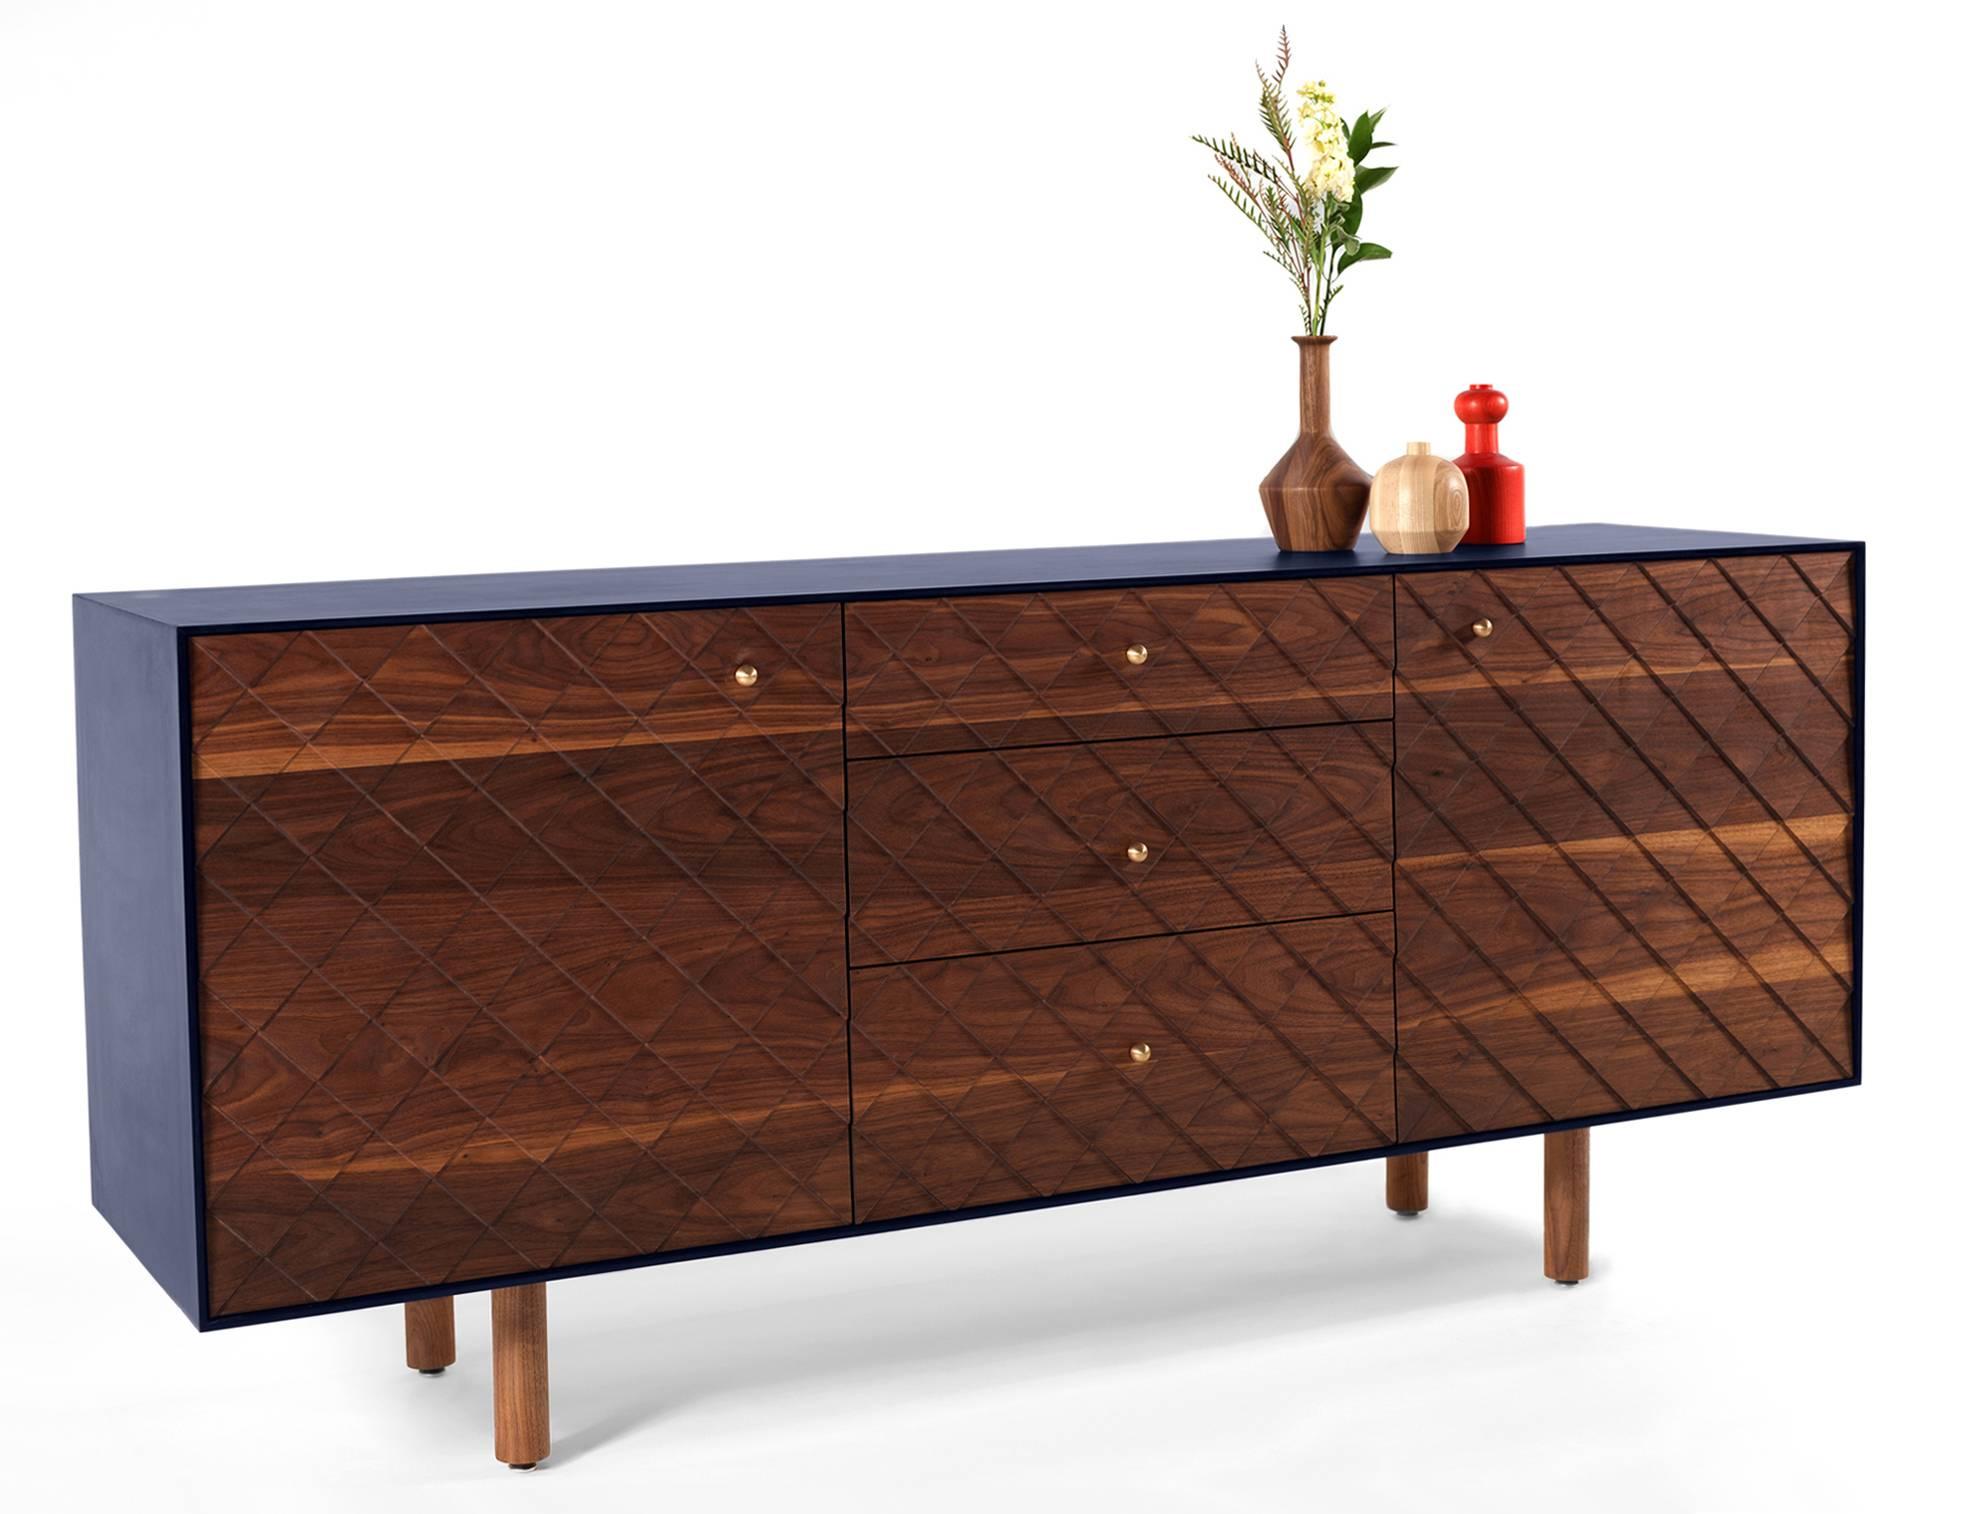 Our kragsyde credenza features solid hardwood drawer fronts and doors with a skin of indigo paperstone.
It began as an investigation into applying 3-d surface textures onto hardwood panels and the resulting pattern was inspired by the shingle style